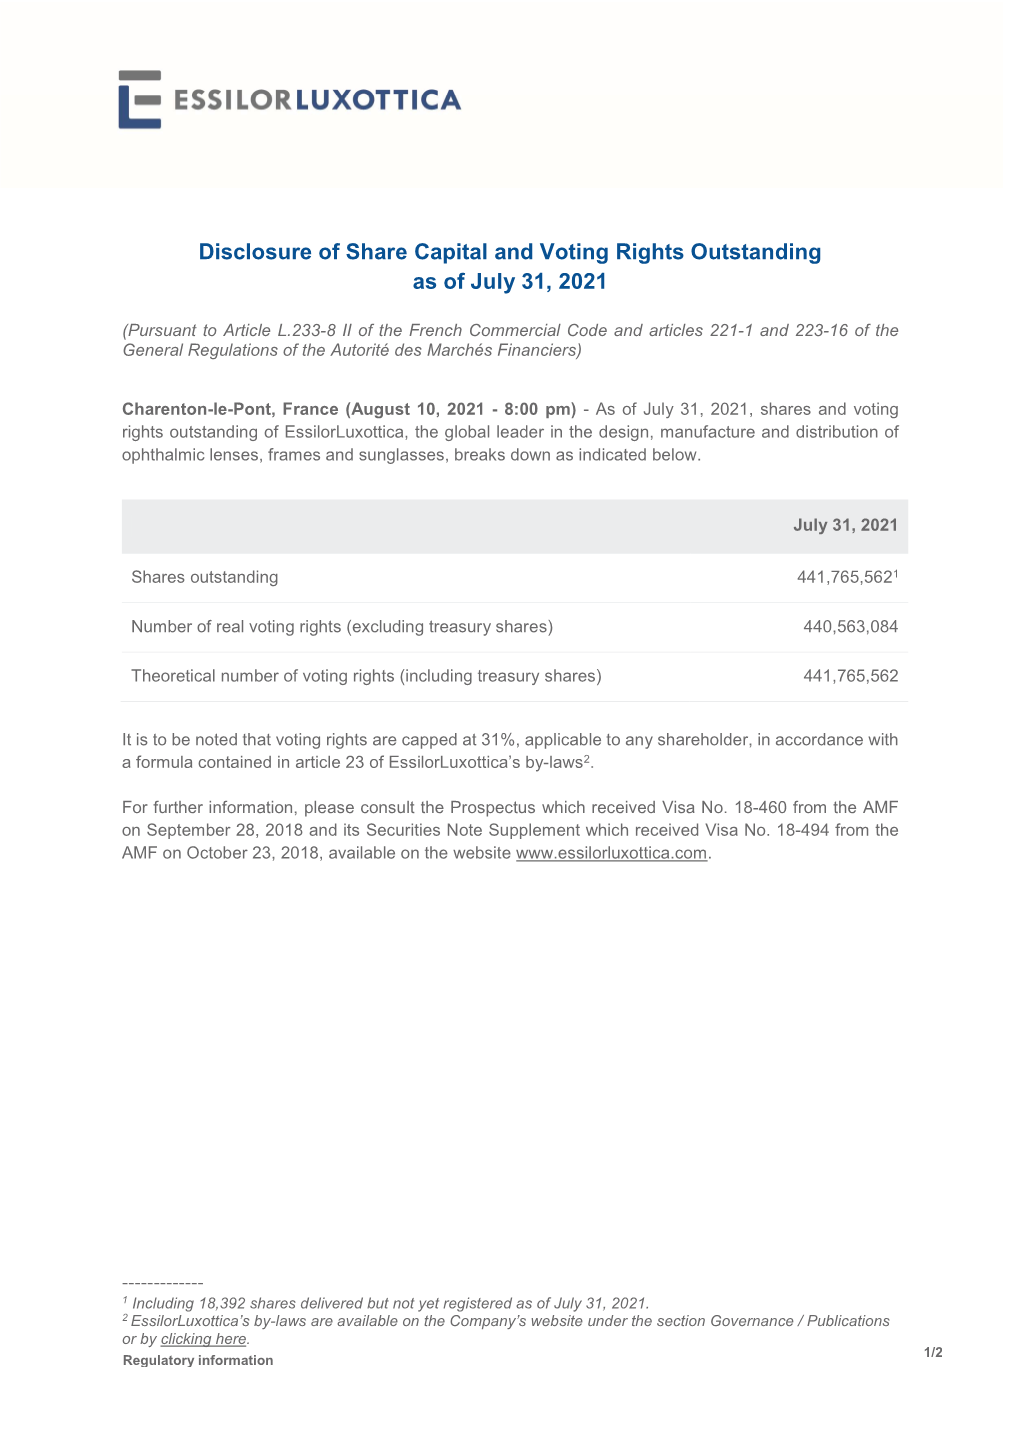 Share Capital and Voting Rights Outstanding As of July 31, 2021